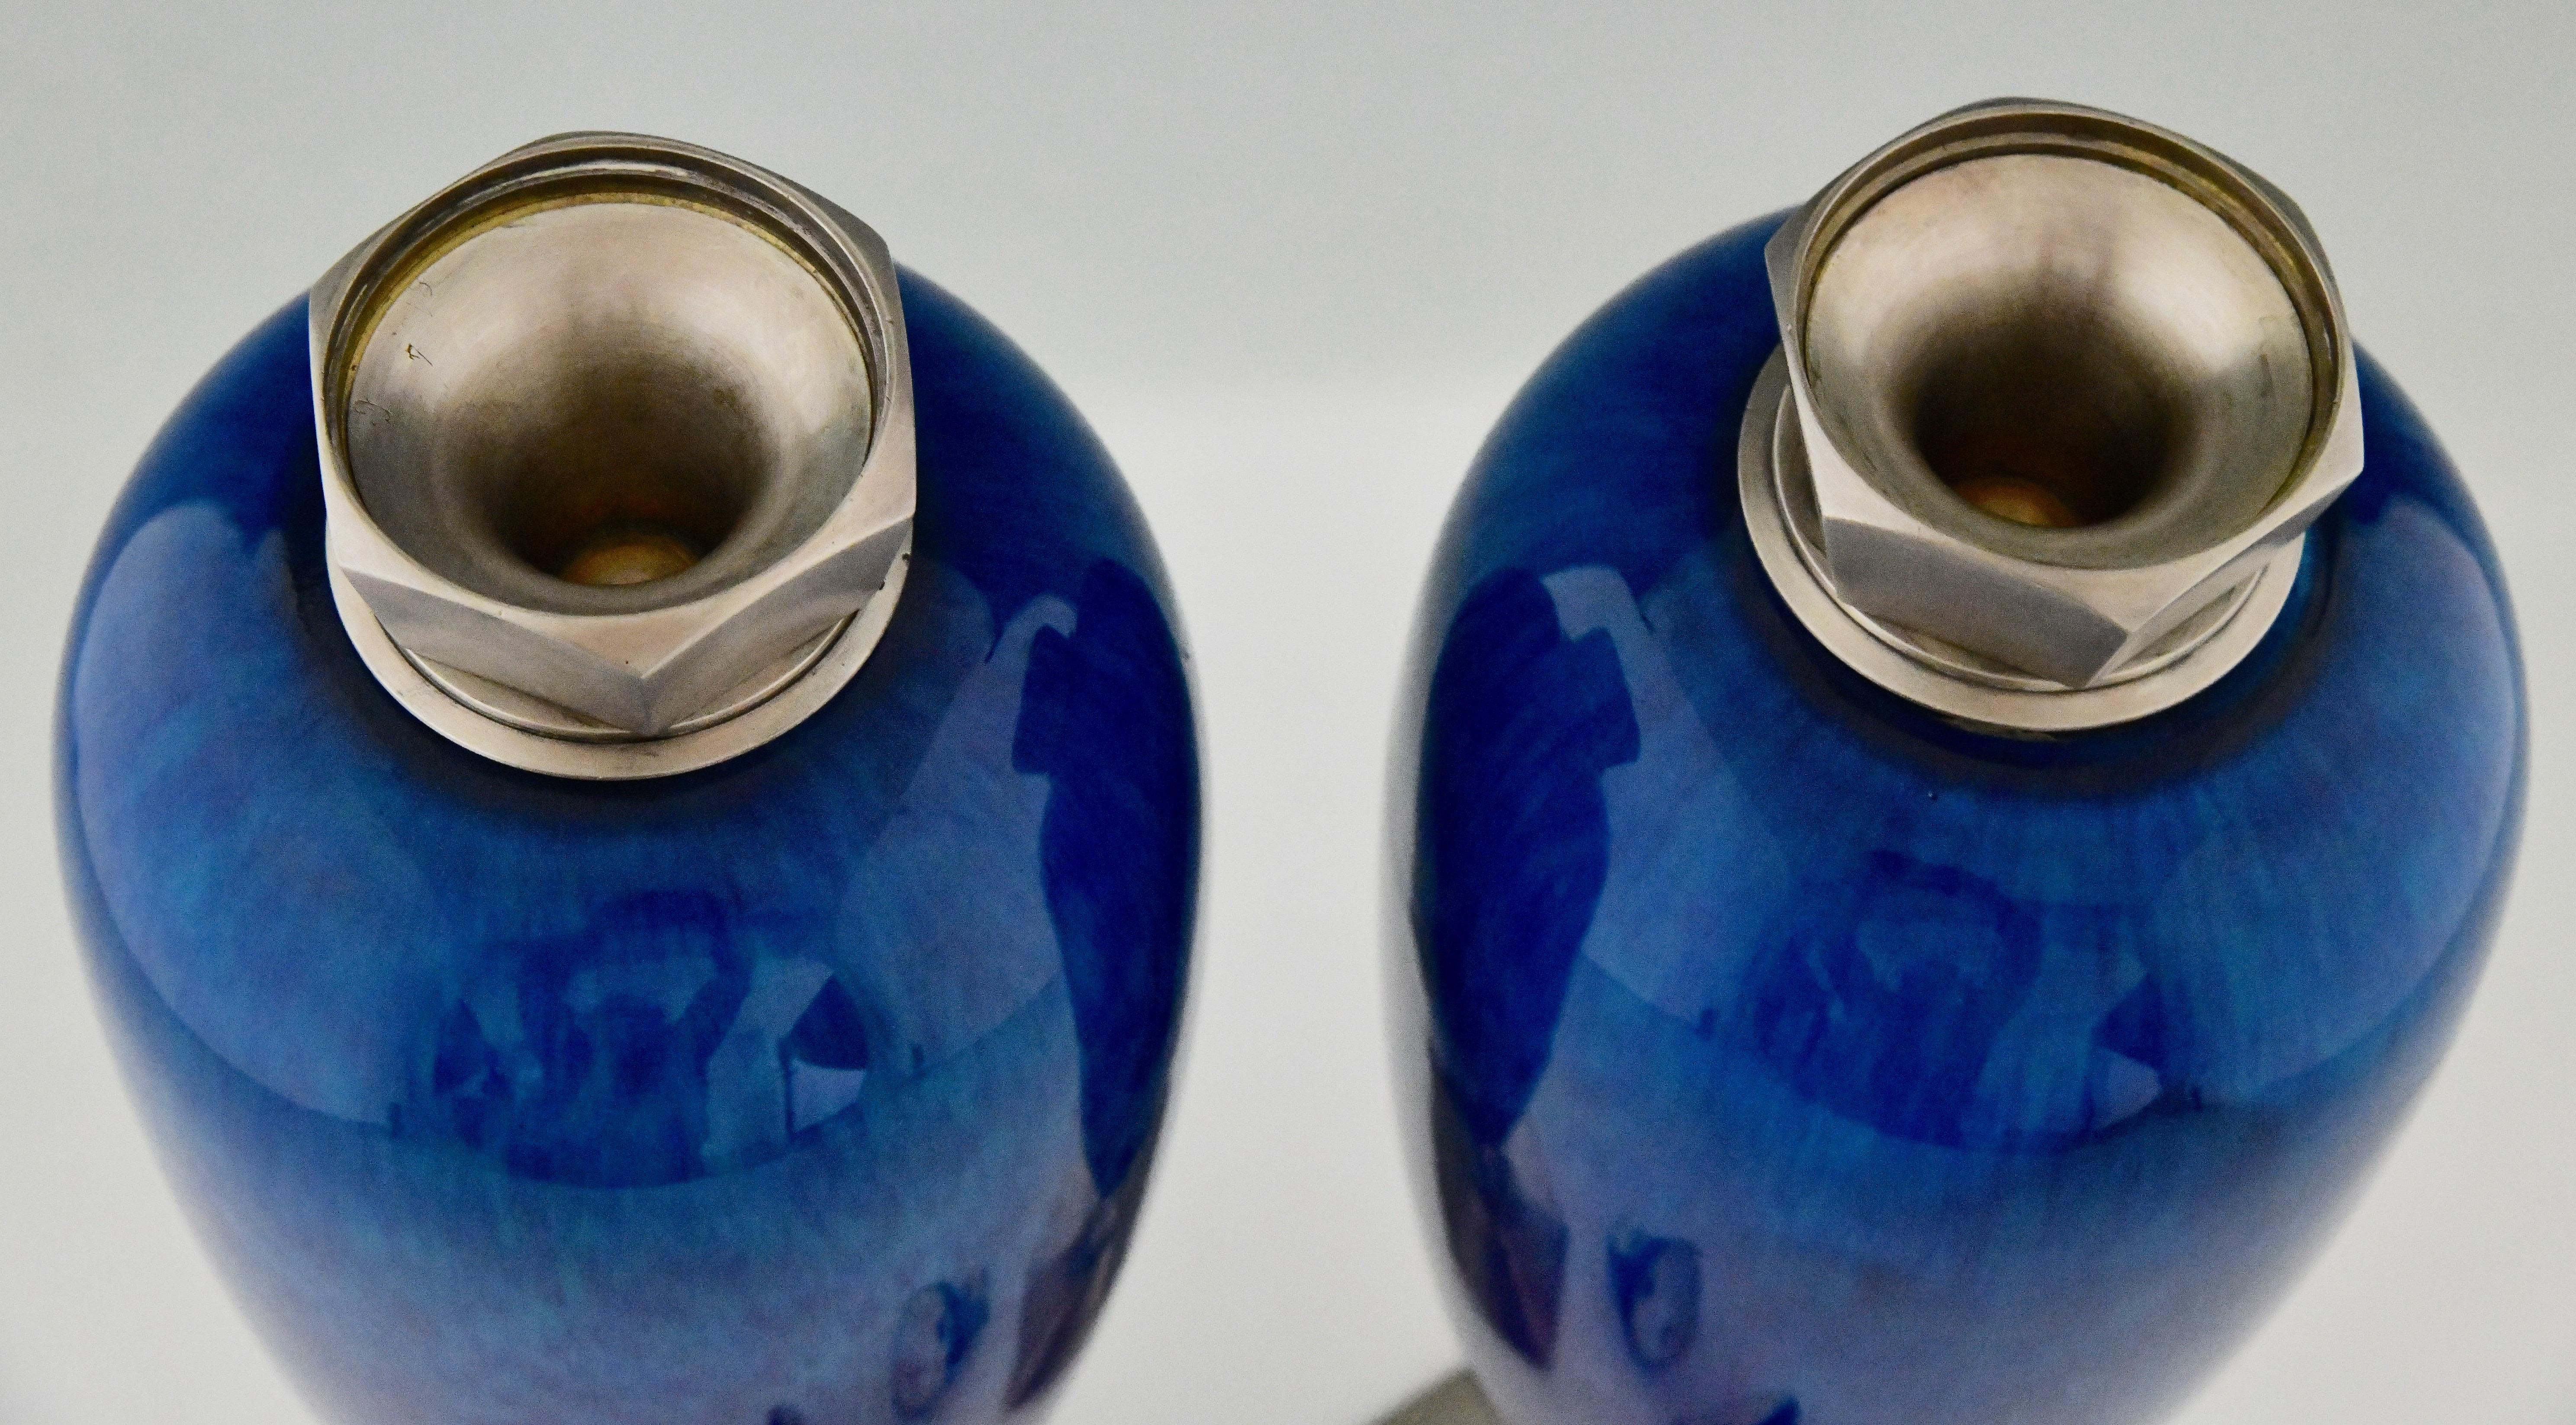 Early 20th Century Pair of Art Deco Blue Ceramic Vases or Urns Paul Milet for Sèvres France, 1925